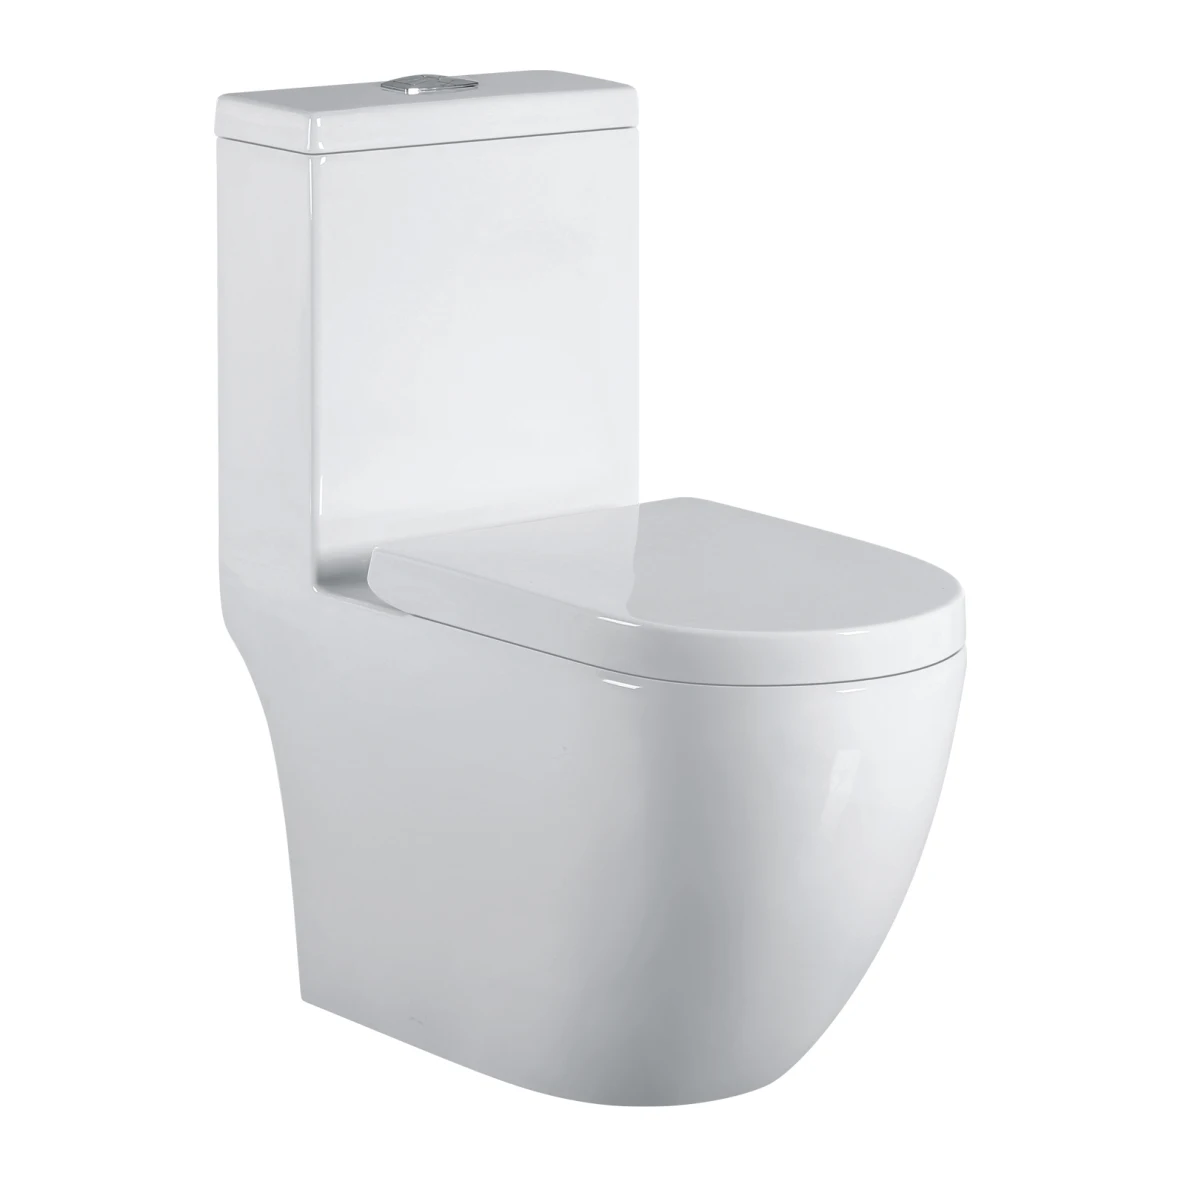 Latest Design Sanitary Ware Washdown And Siphonic Ceramic One Piece Toilet Modern Bathroom Toilet